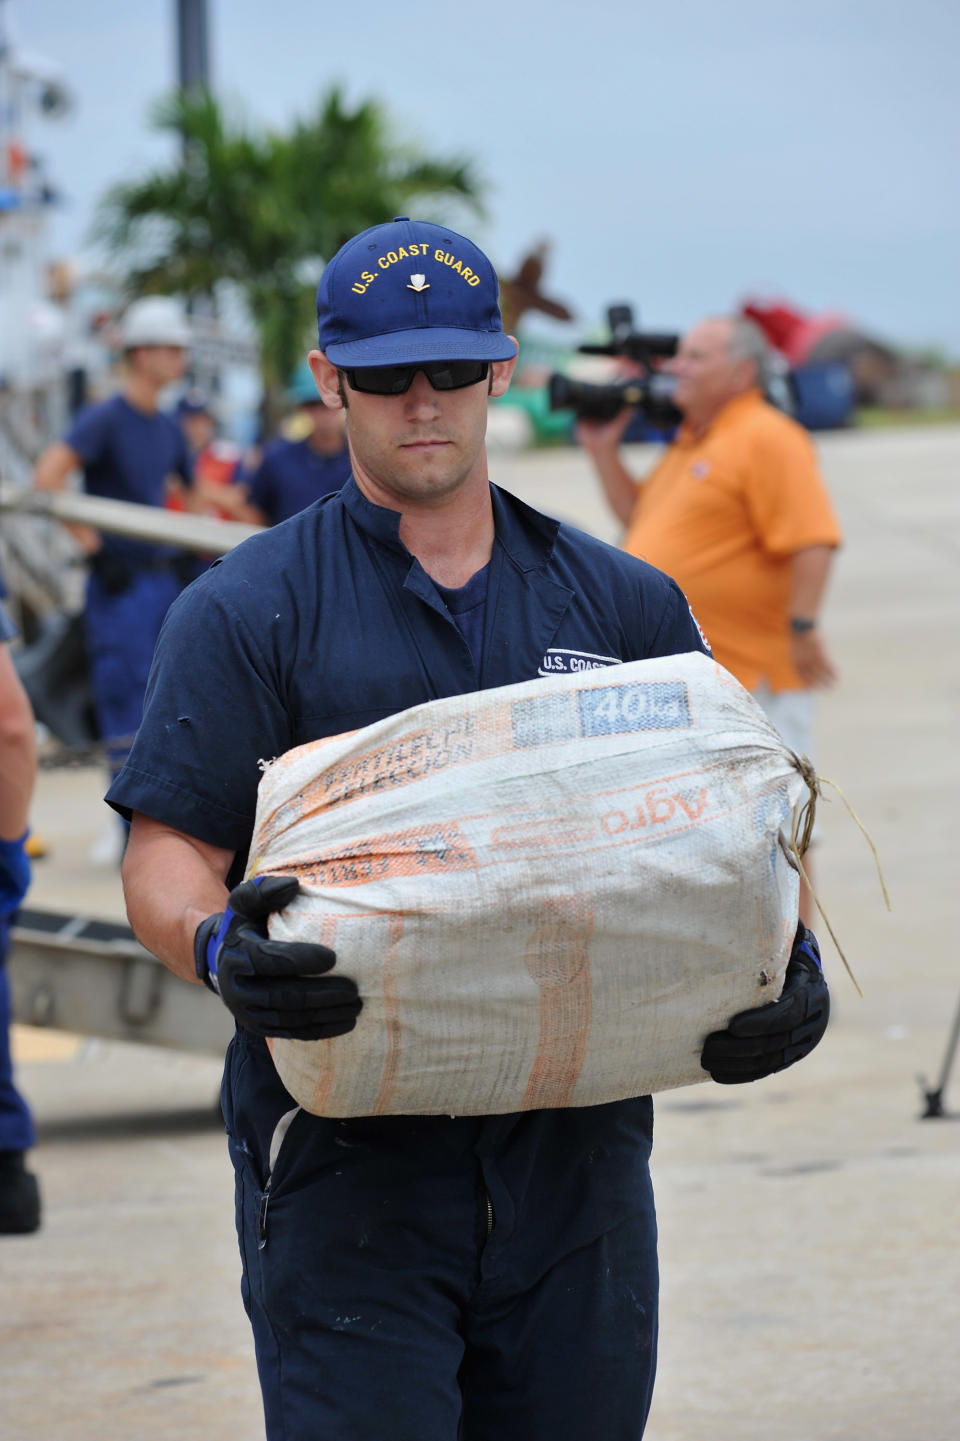 US Coast Guard Finds 7 Tons Of Cocaine On Self-Propelled Semi-Submersible